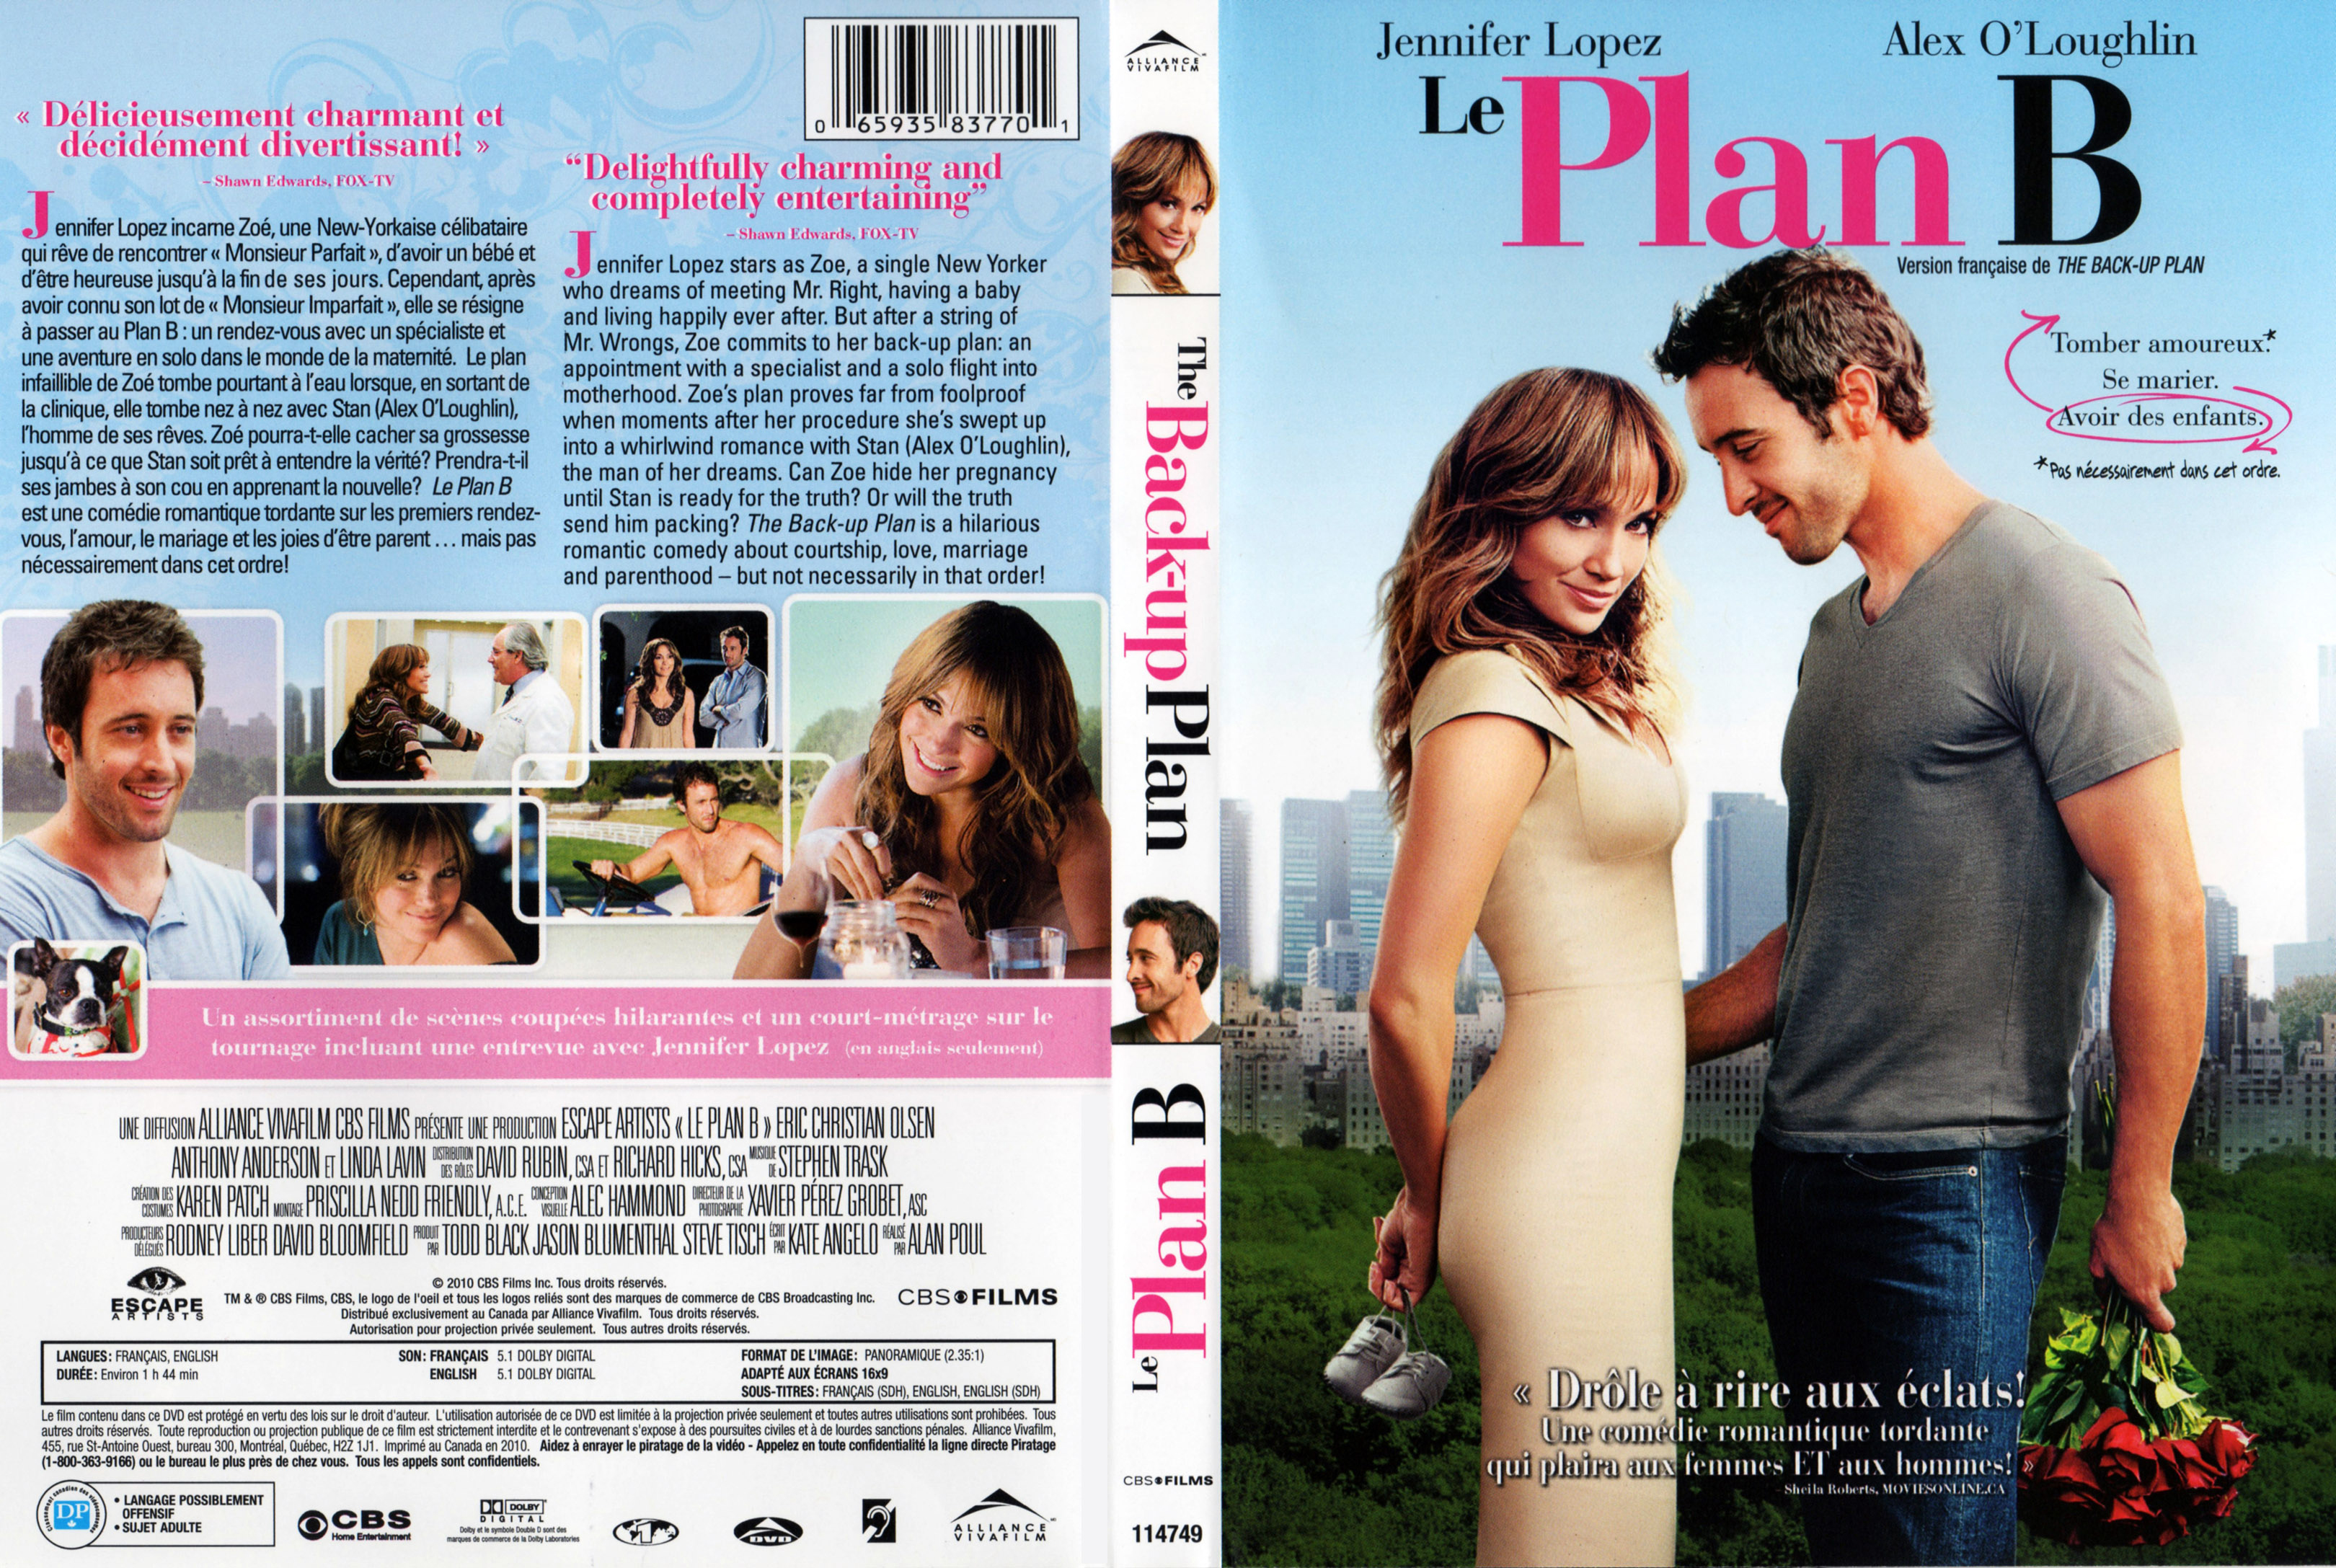 Jaquette DVD Le plan B - The Back-Up Plan (Canadienne)